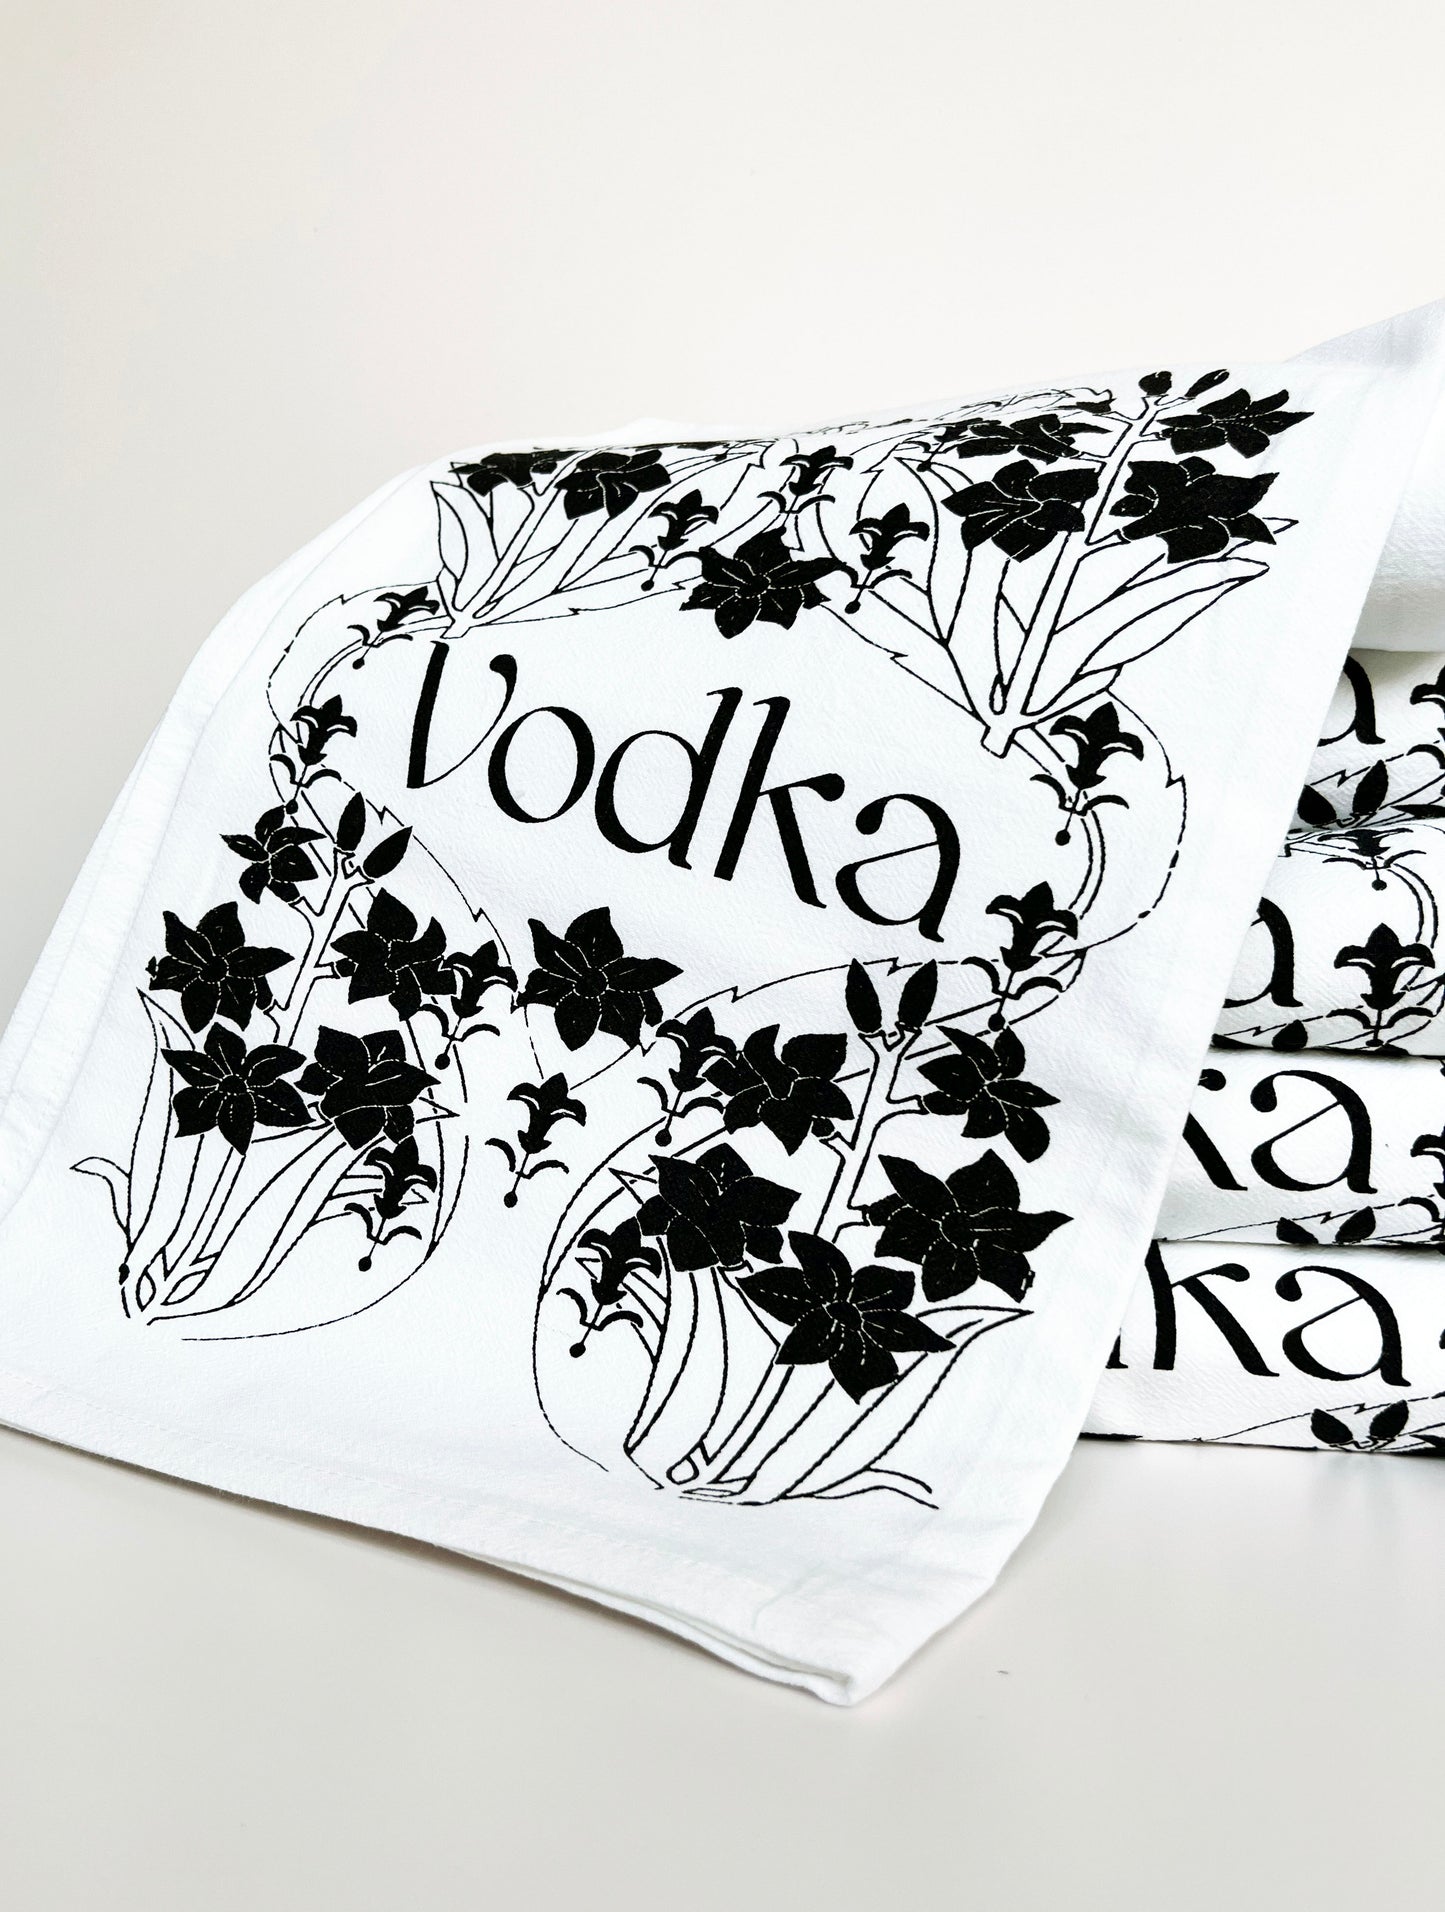 black and white screen printed vodka tea towel pretty retro floral design decorative cotton towels for home bar coin laundry montana 